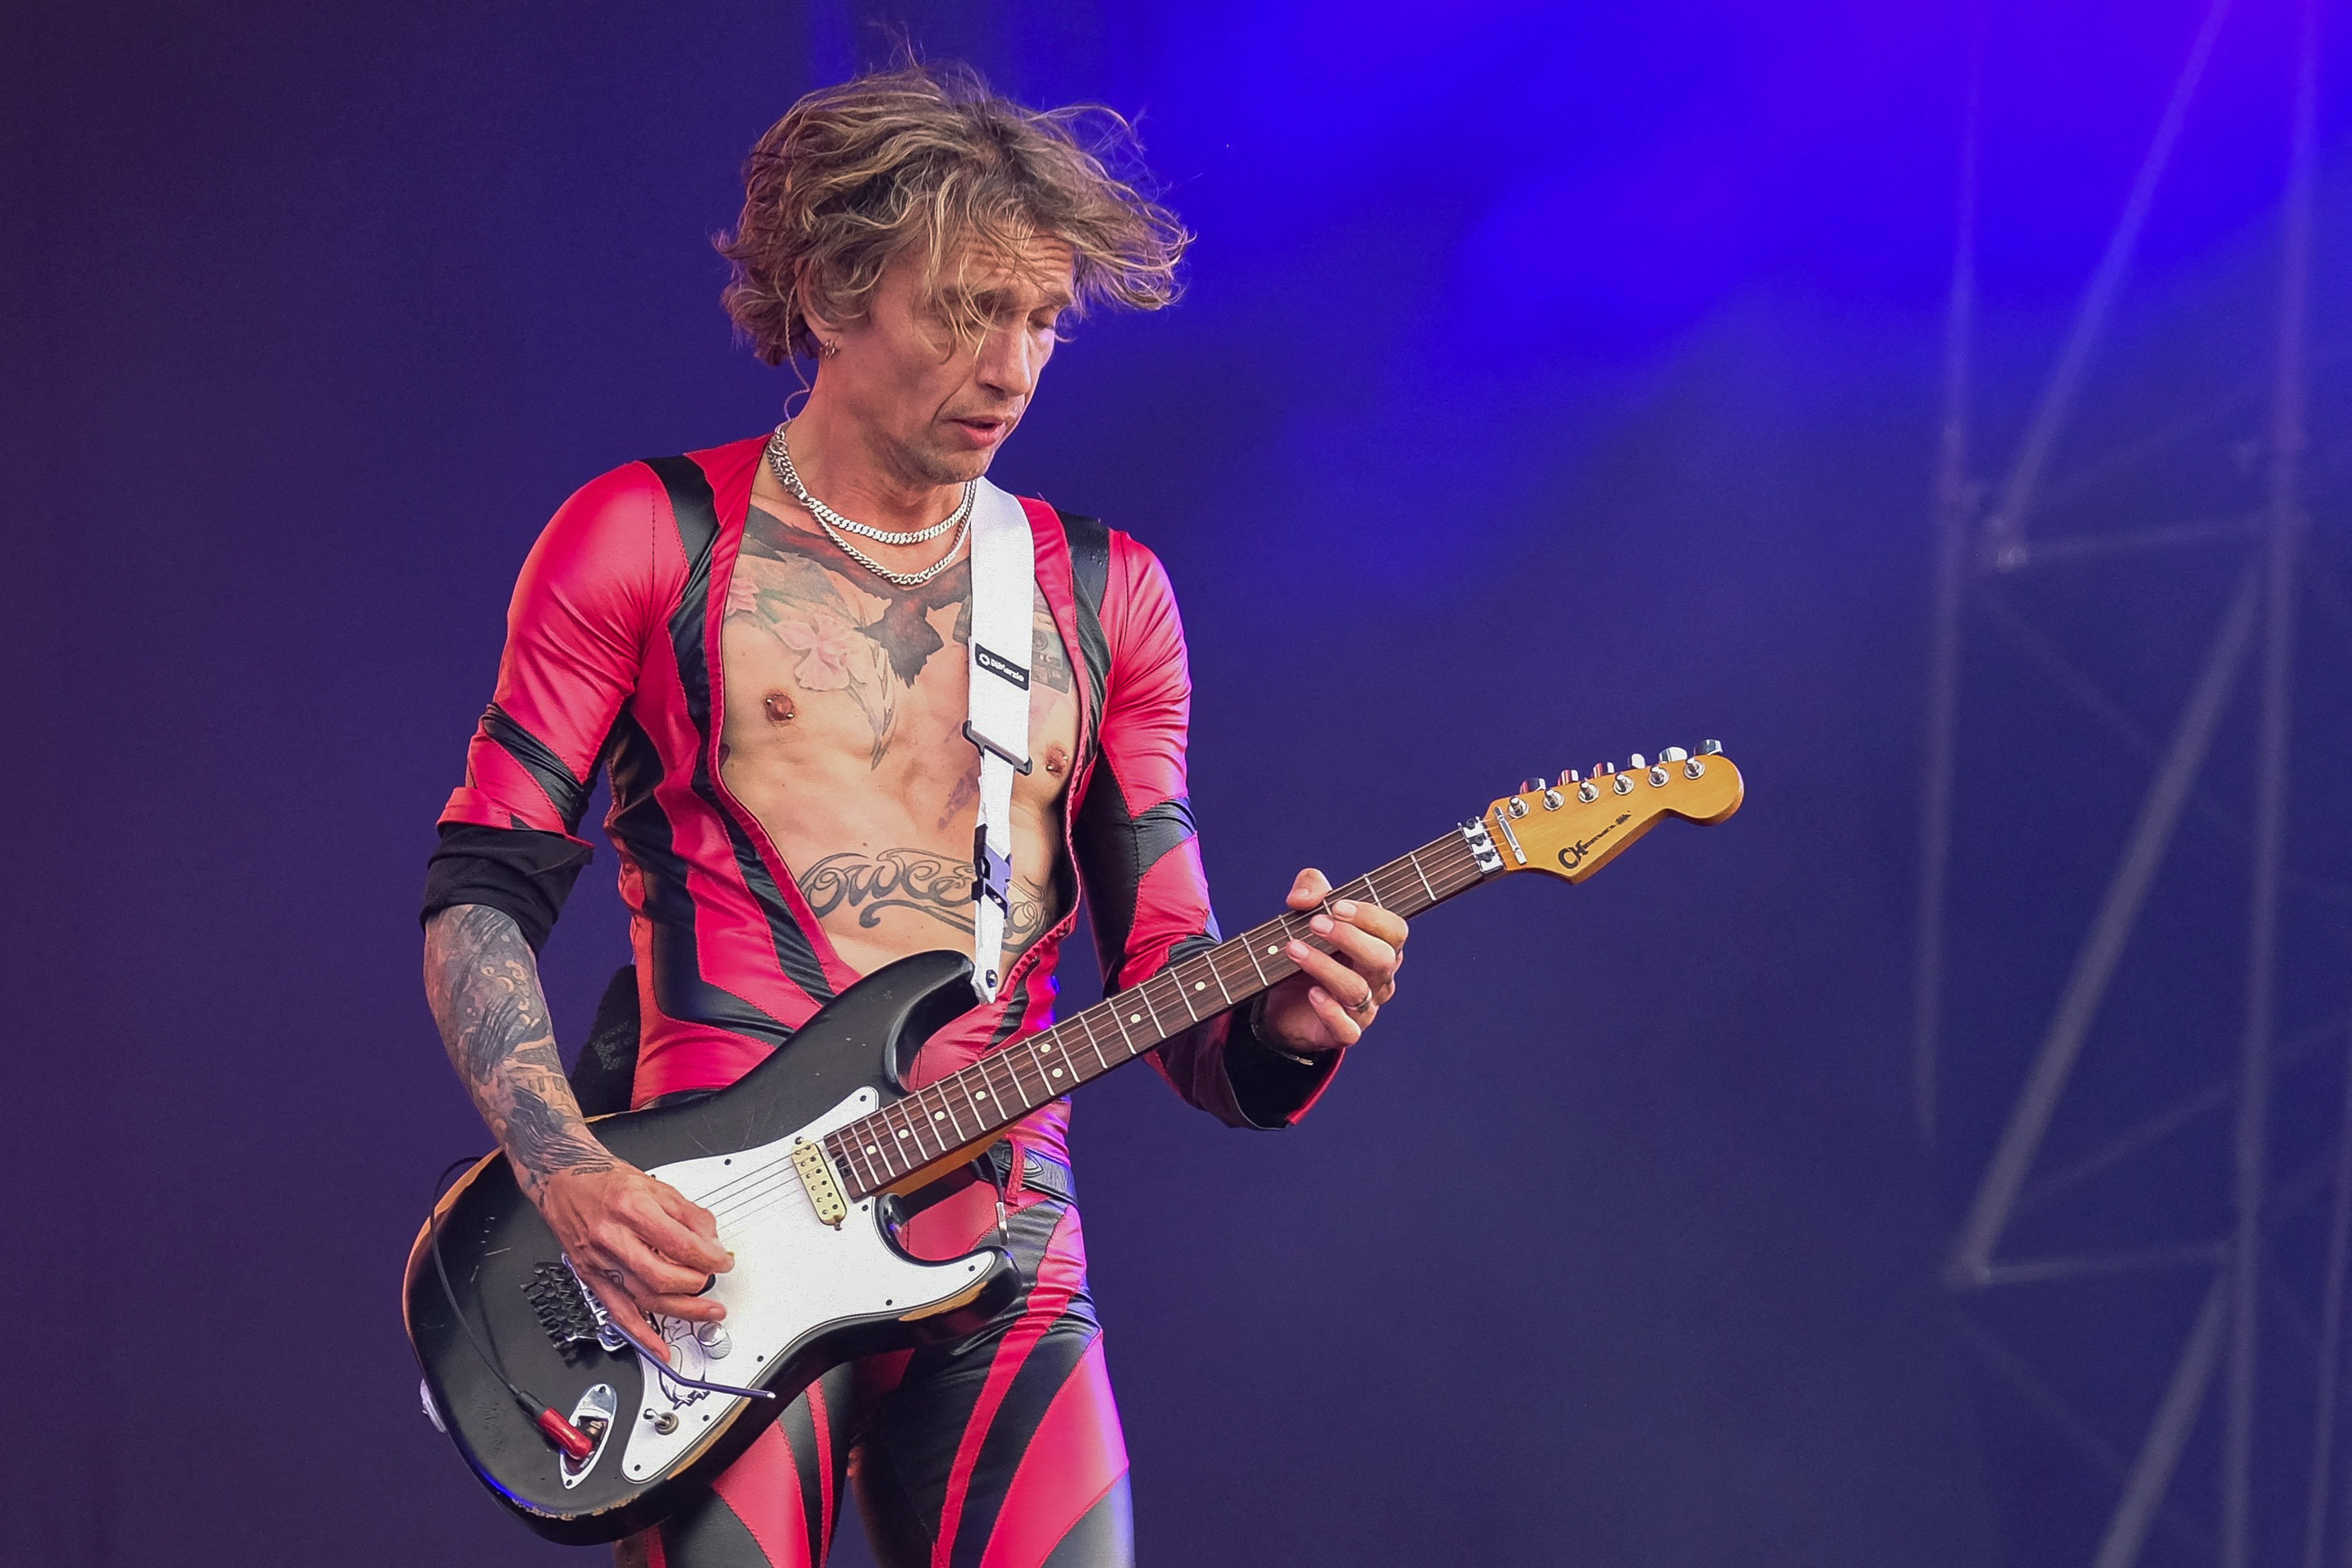 Hawkins put on a flipping great show at the Isle of Wight Festival